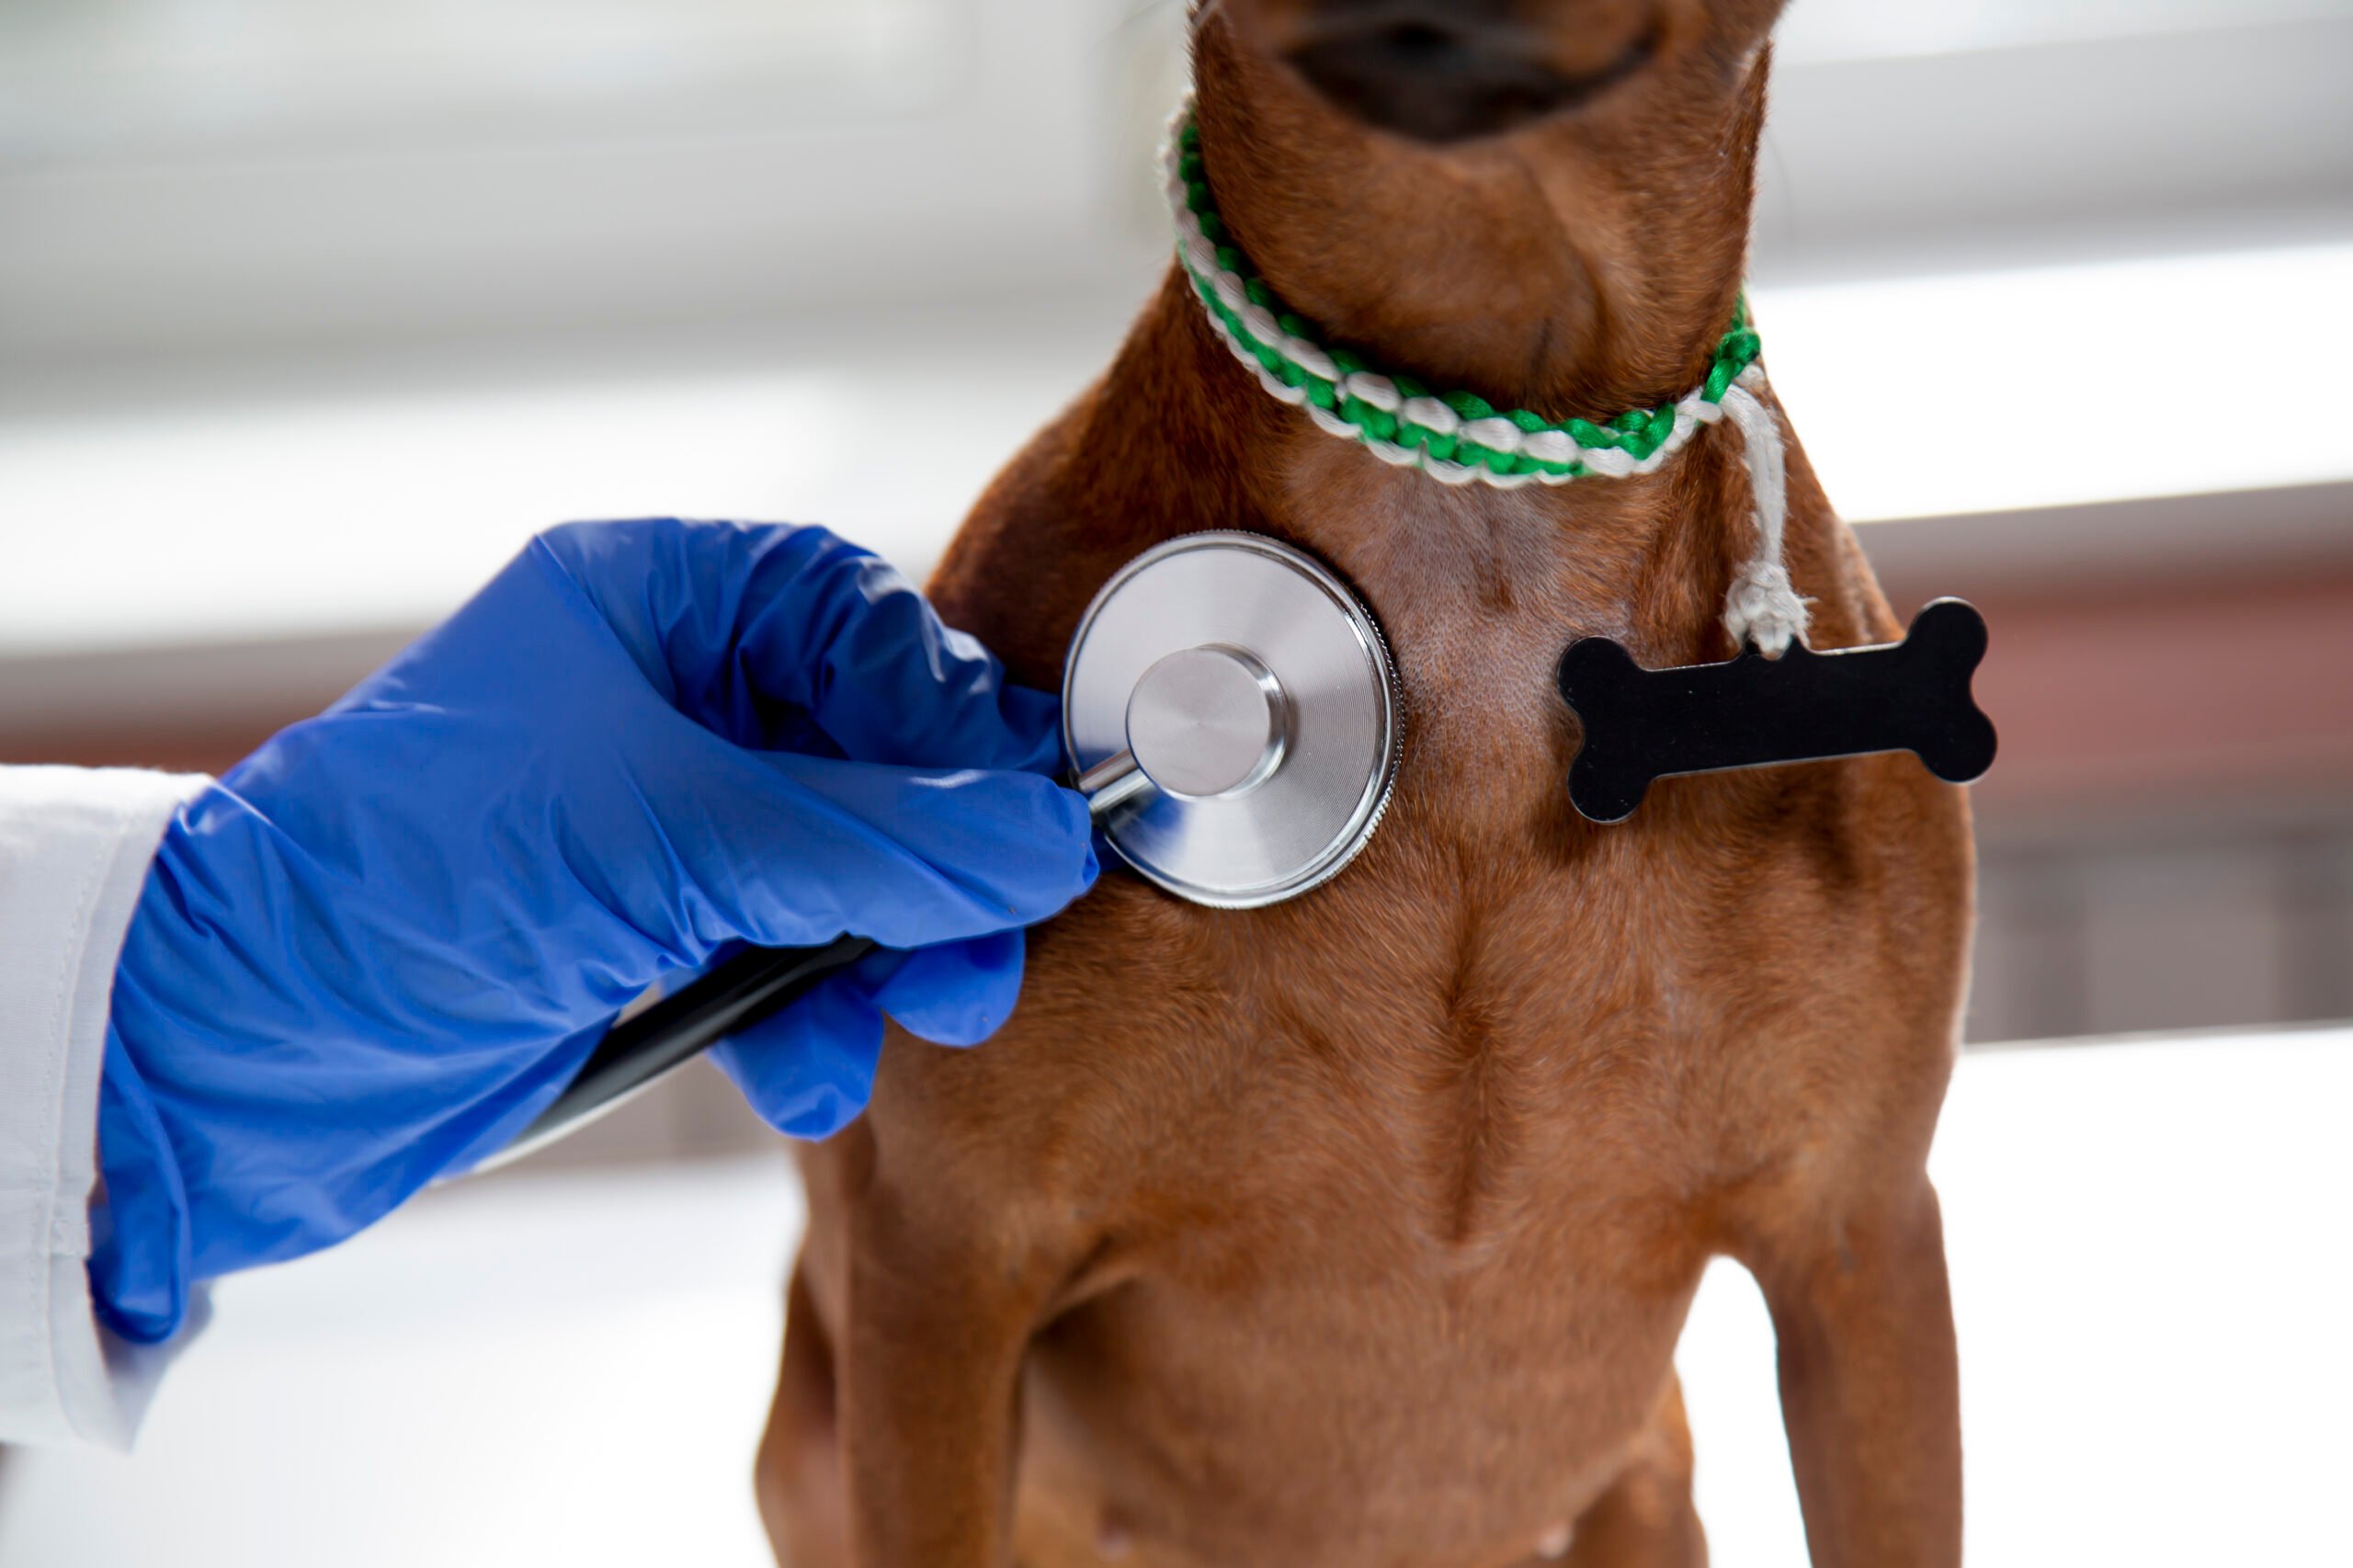 The doctor uses a stethoscope to listen to the pet's breathing.